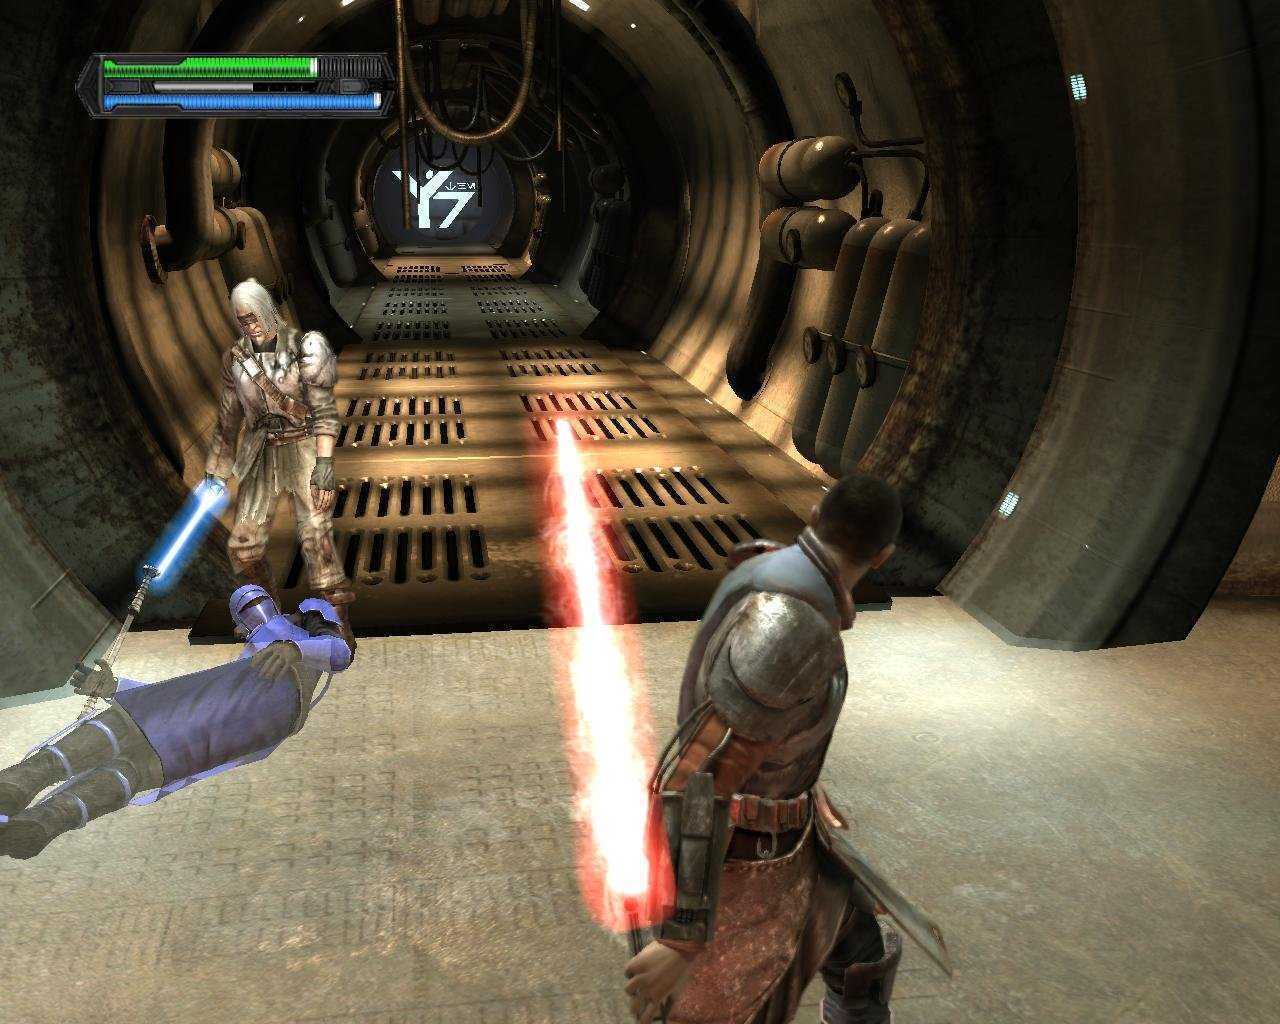 Все части звездных войн игры. Star Wars the Force unleashed Ultimate Sith Edition (2009). Стар ВАРС the Force unleashed 1. Игра Star Wars: the Force unleashed II. Star Wars: the Force unleashed - Ultimate Sith Edition.